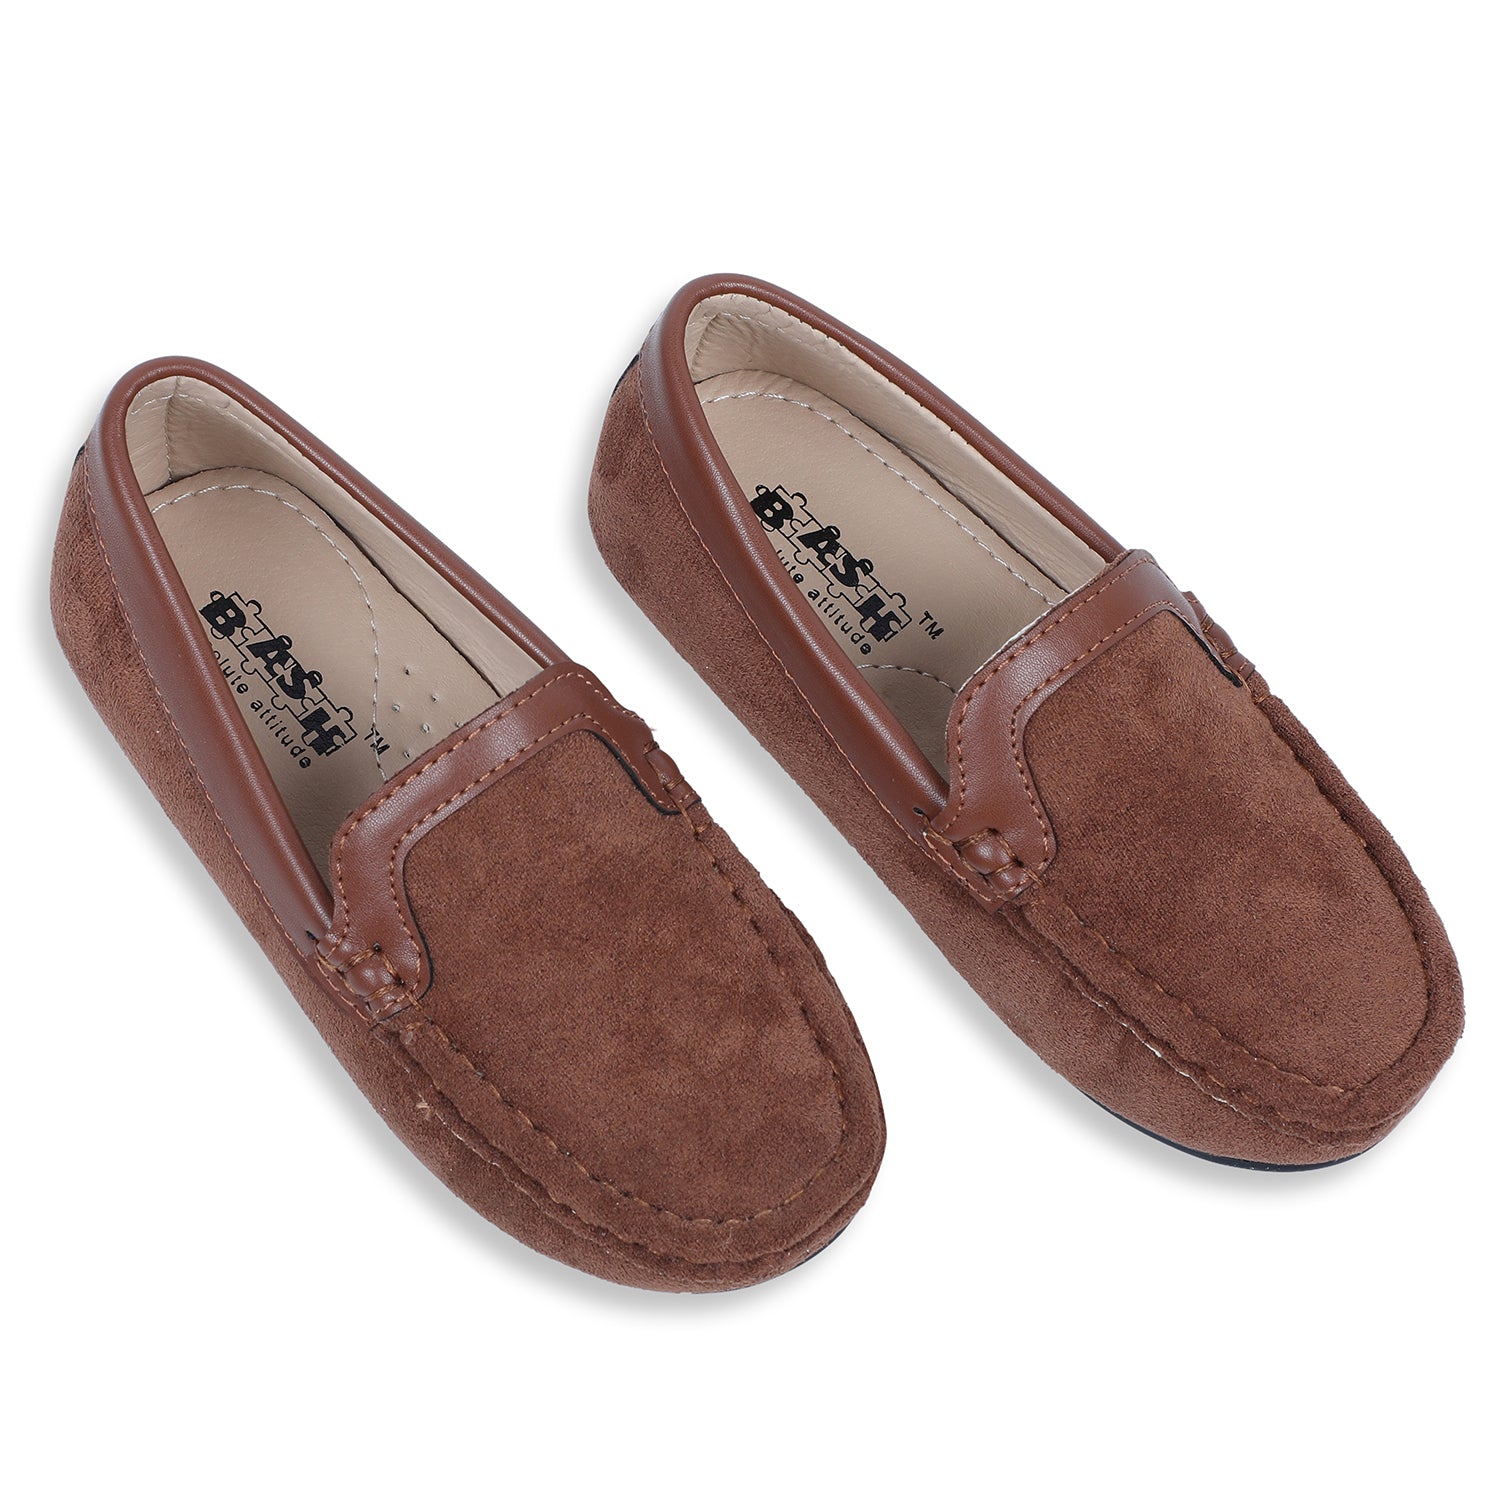 Baby Moo x Bash Kids Suede Loafer Shoes - Tan